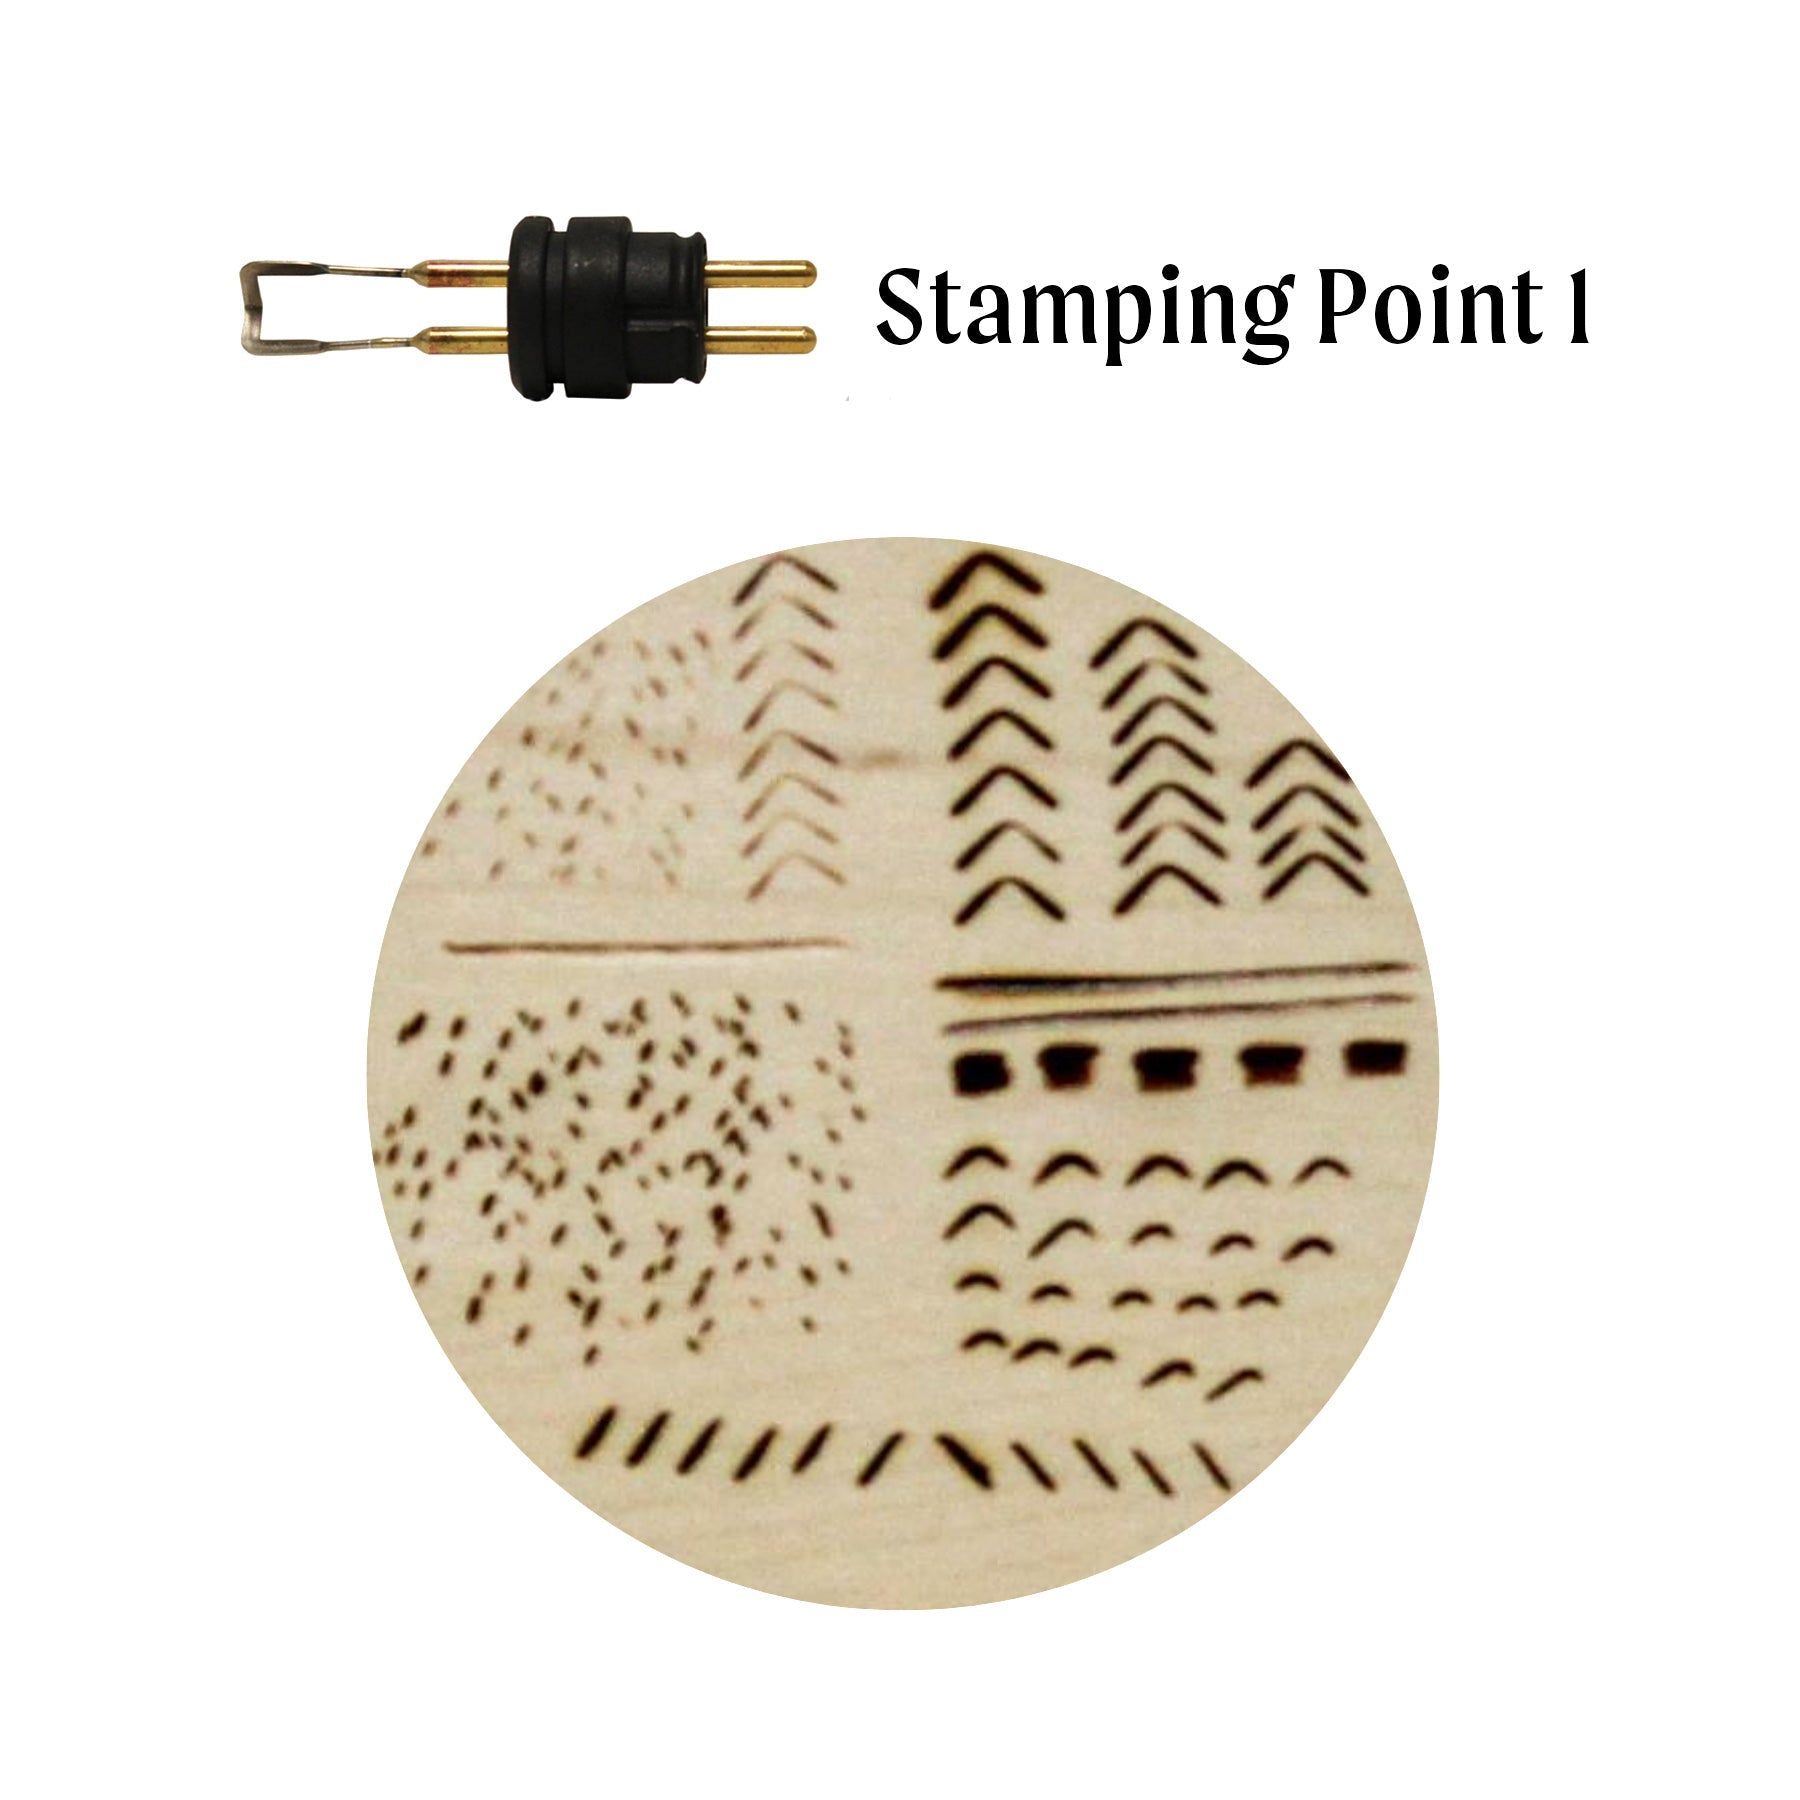 Walnut Hollow®  Using the HotStamps Points with the HotMarks Tool